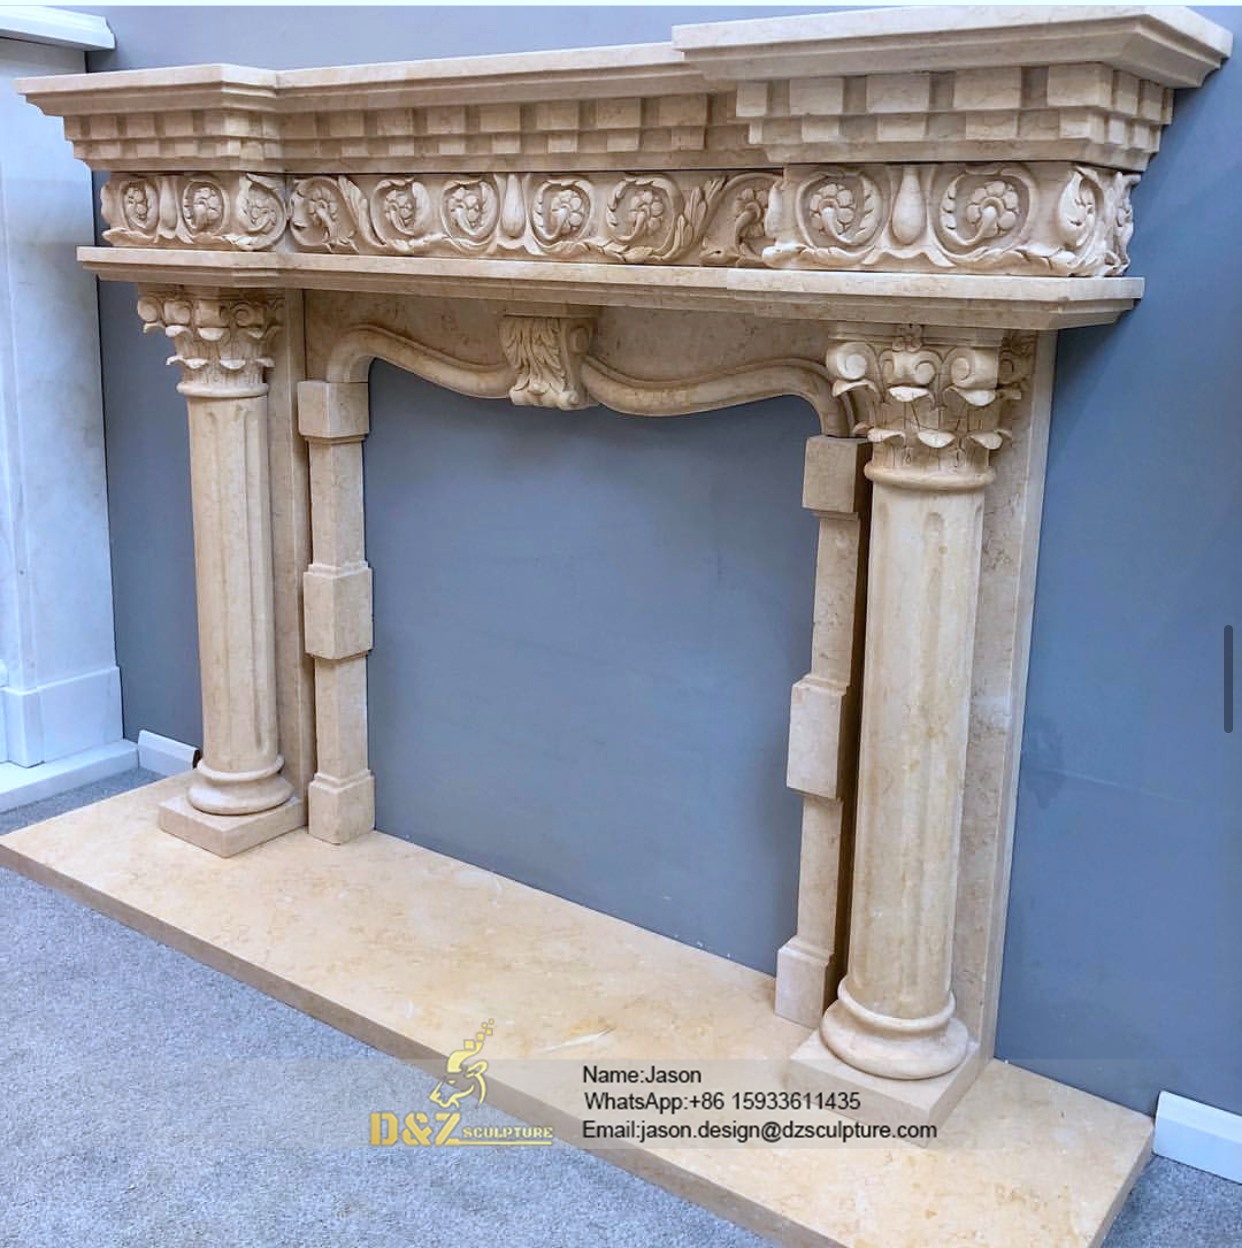 Natural stone made fireplace